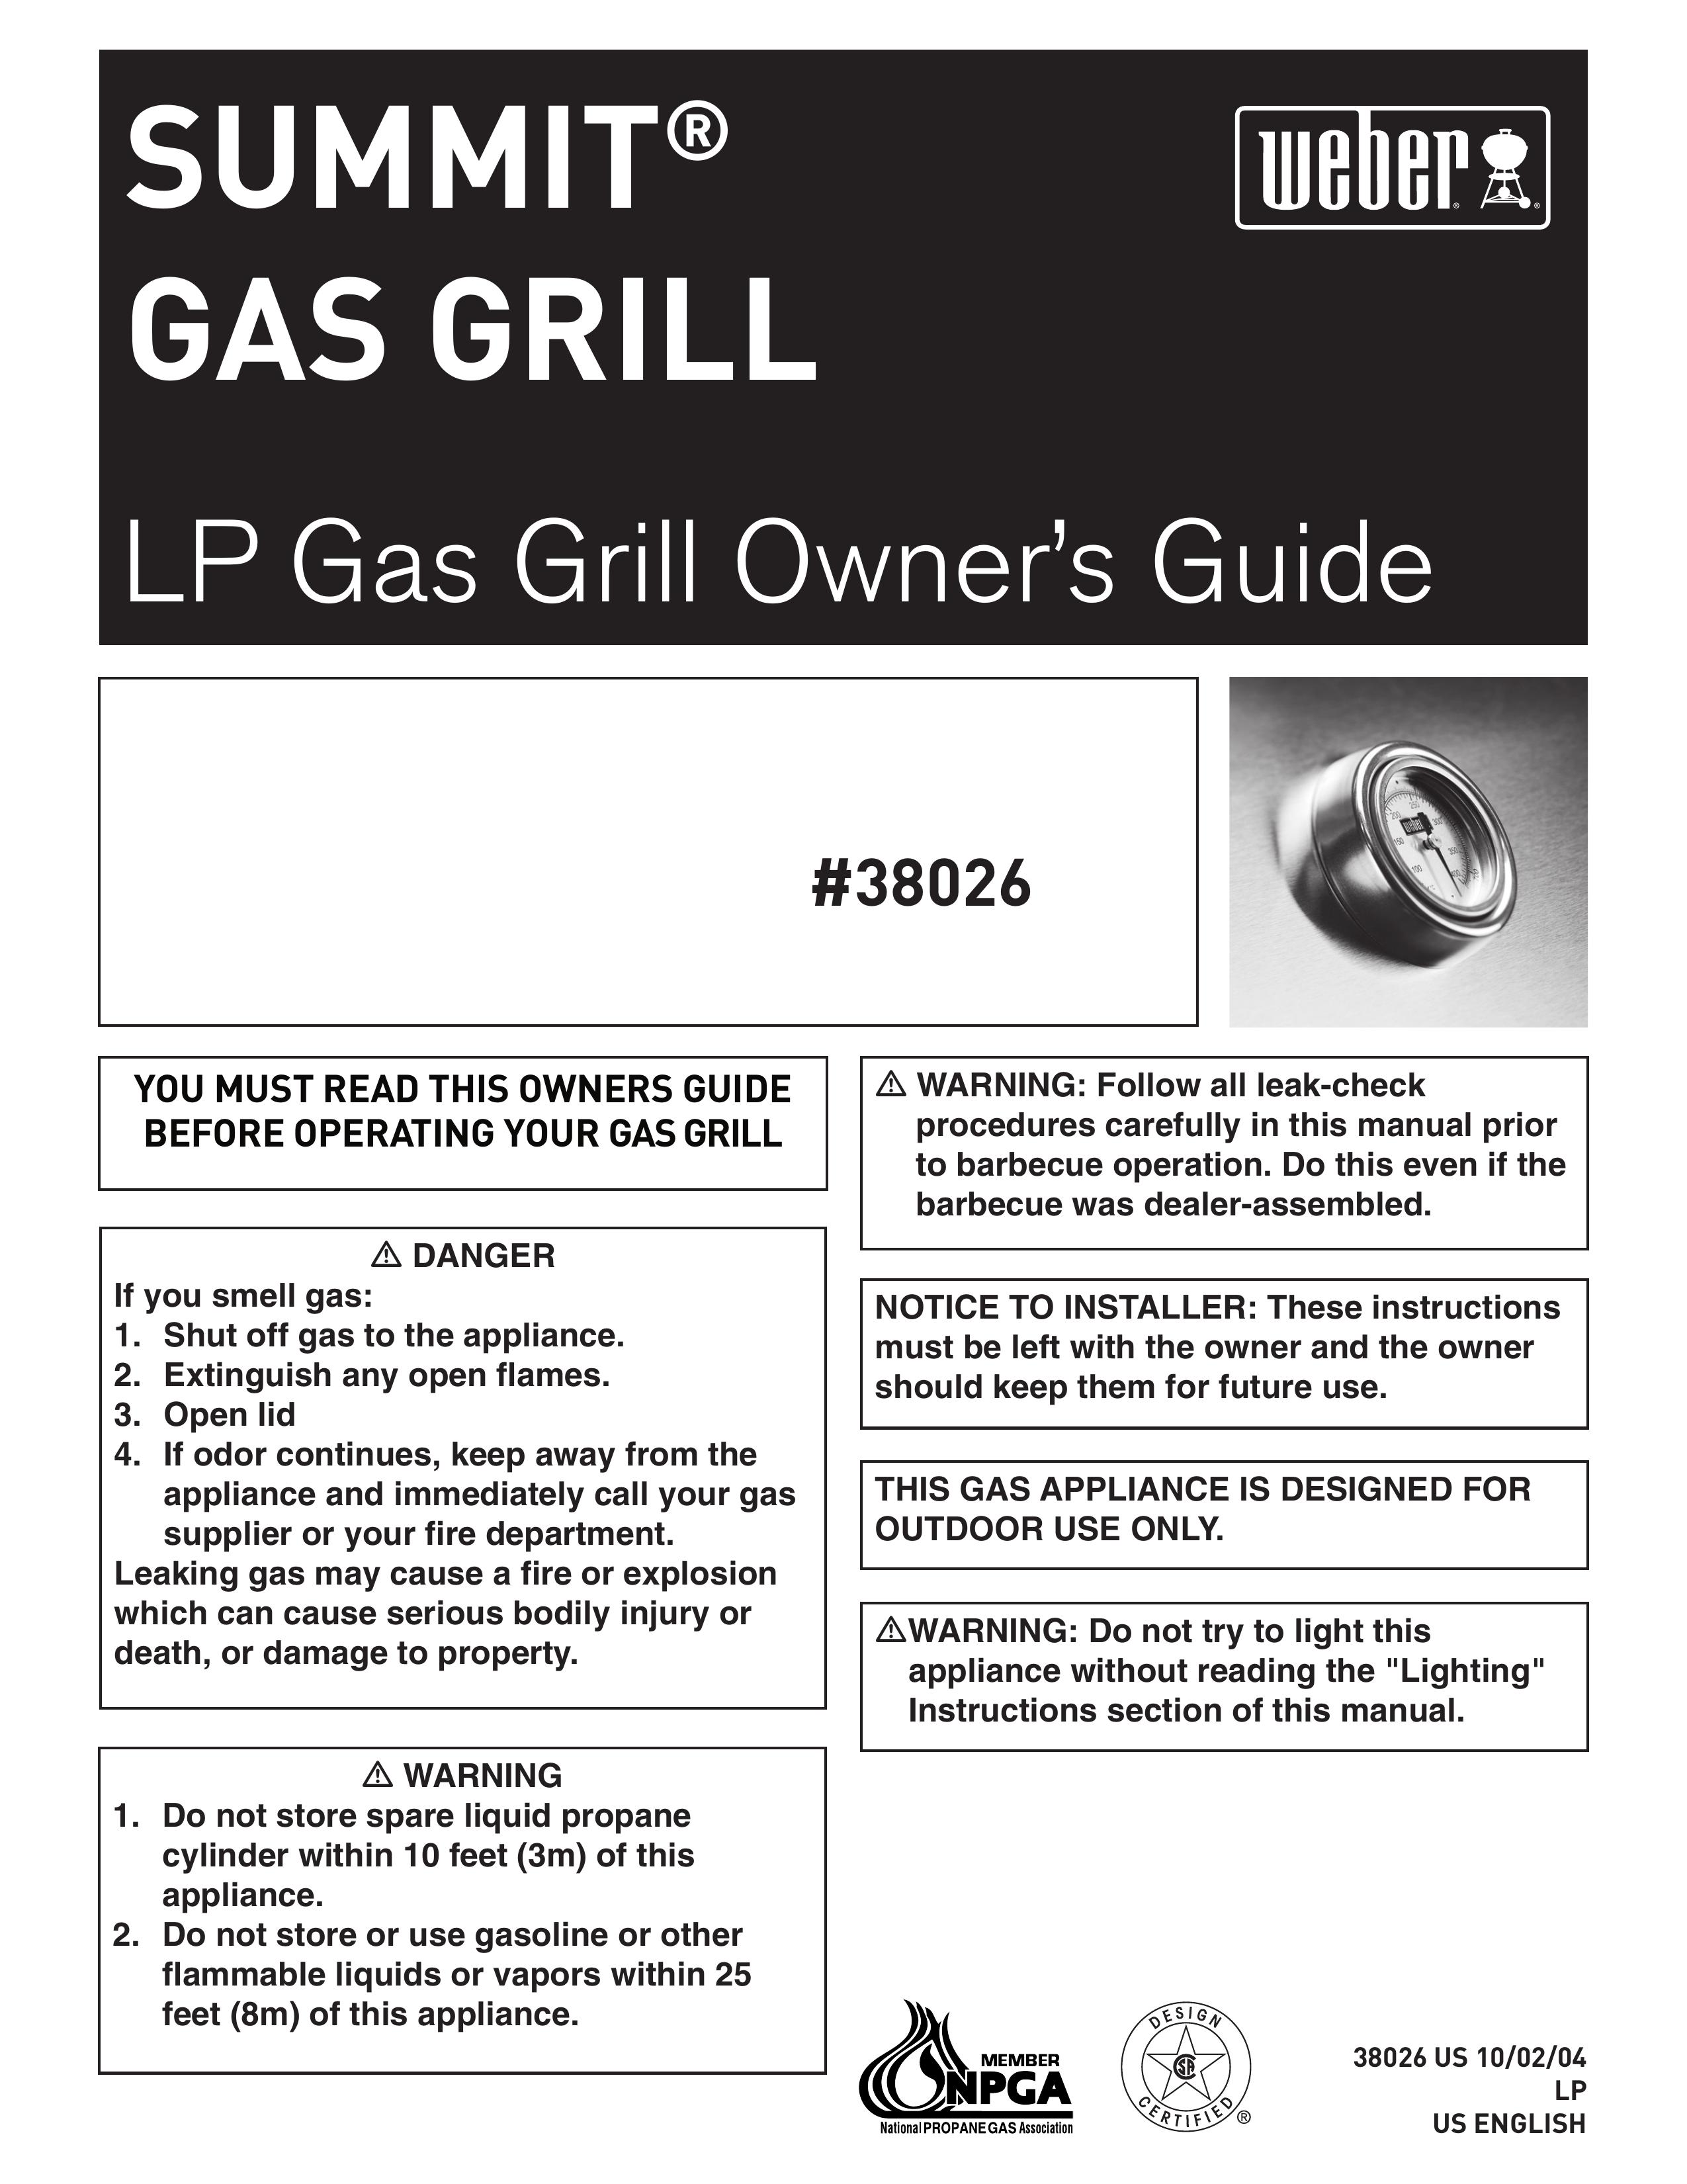 Weber 38026 Gas Grill User Manual